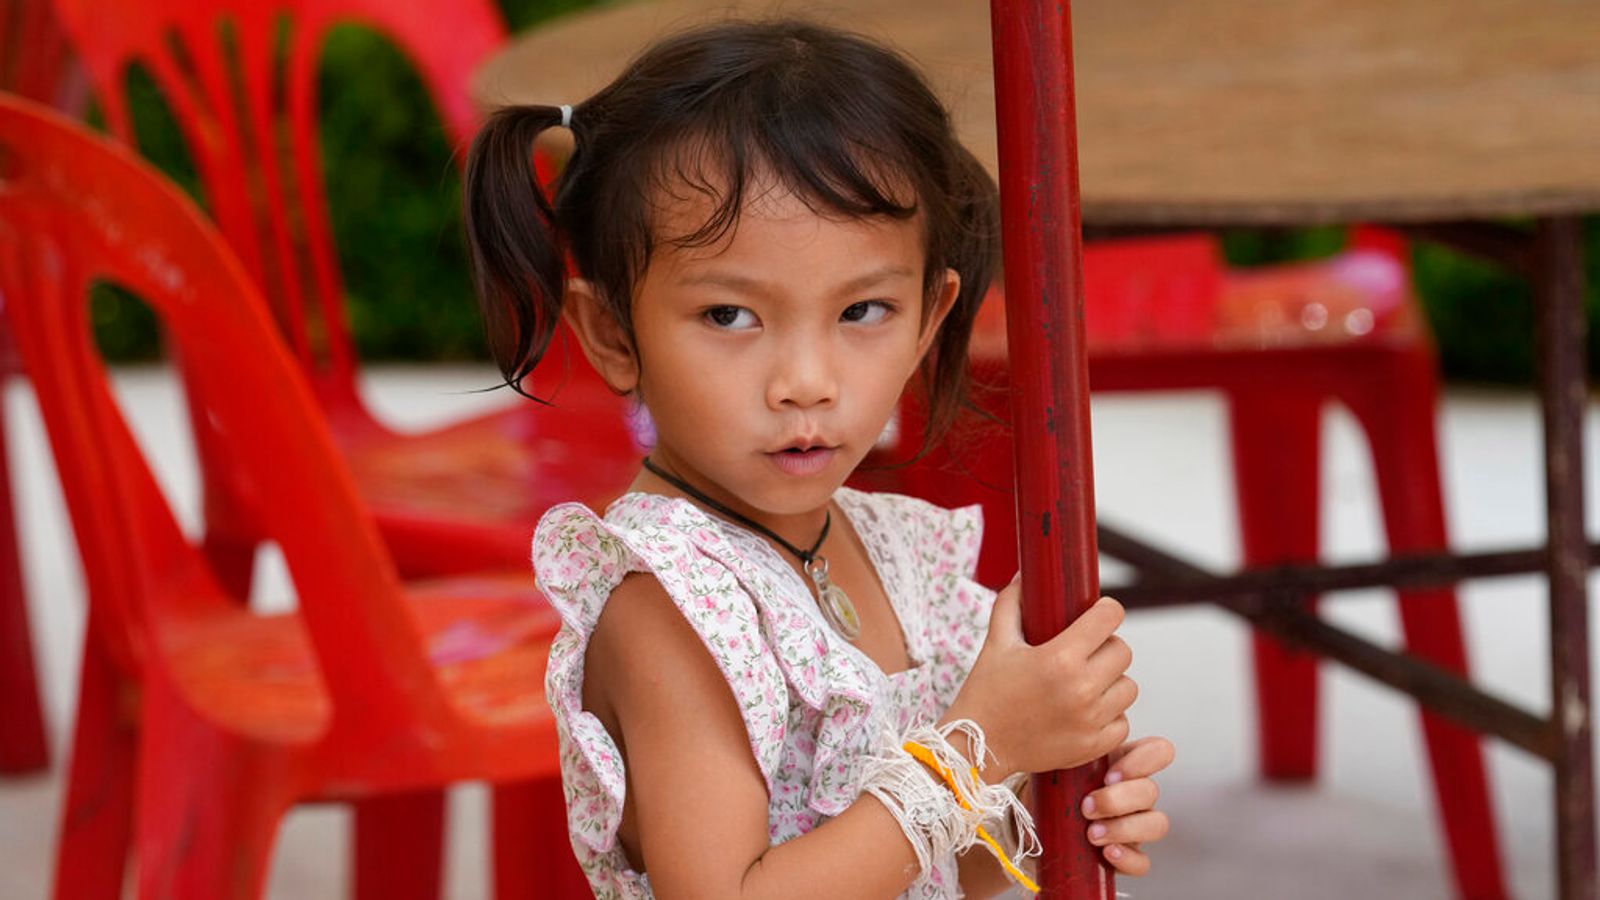 Girl, 3, survives Thailand nursery massacre unscathed after sleeping through attack